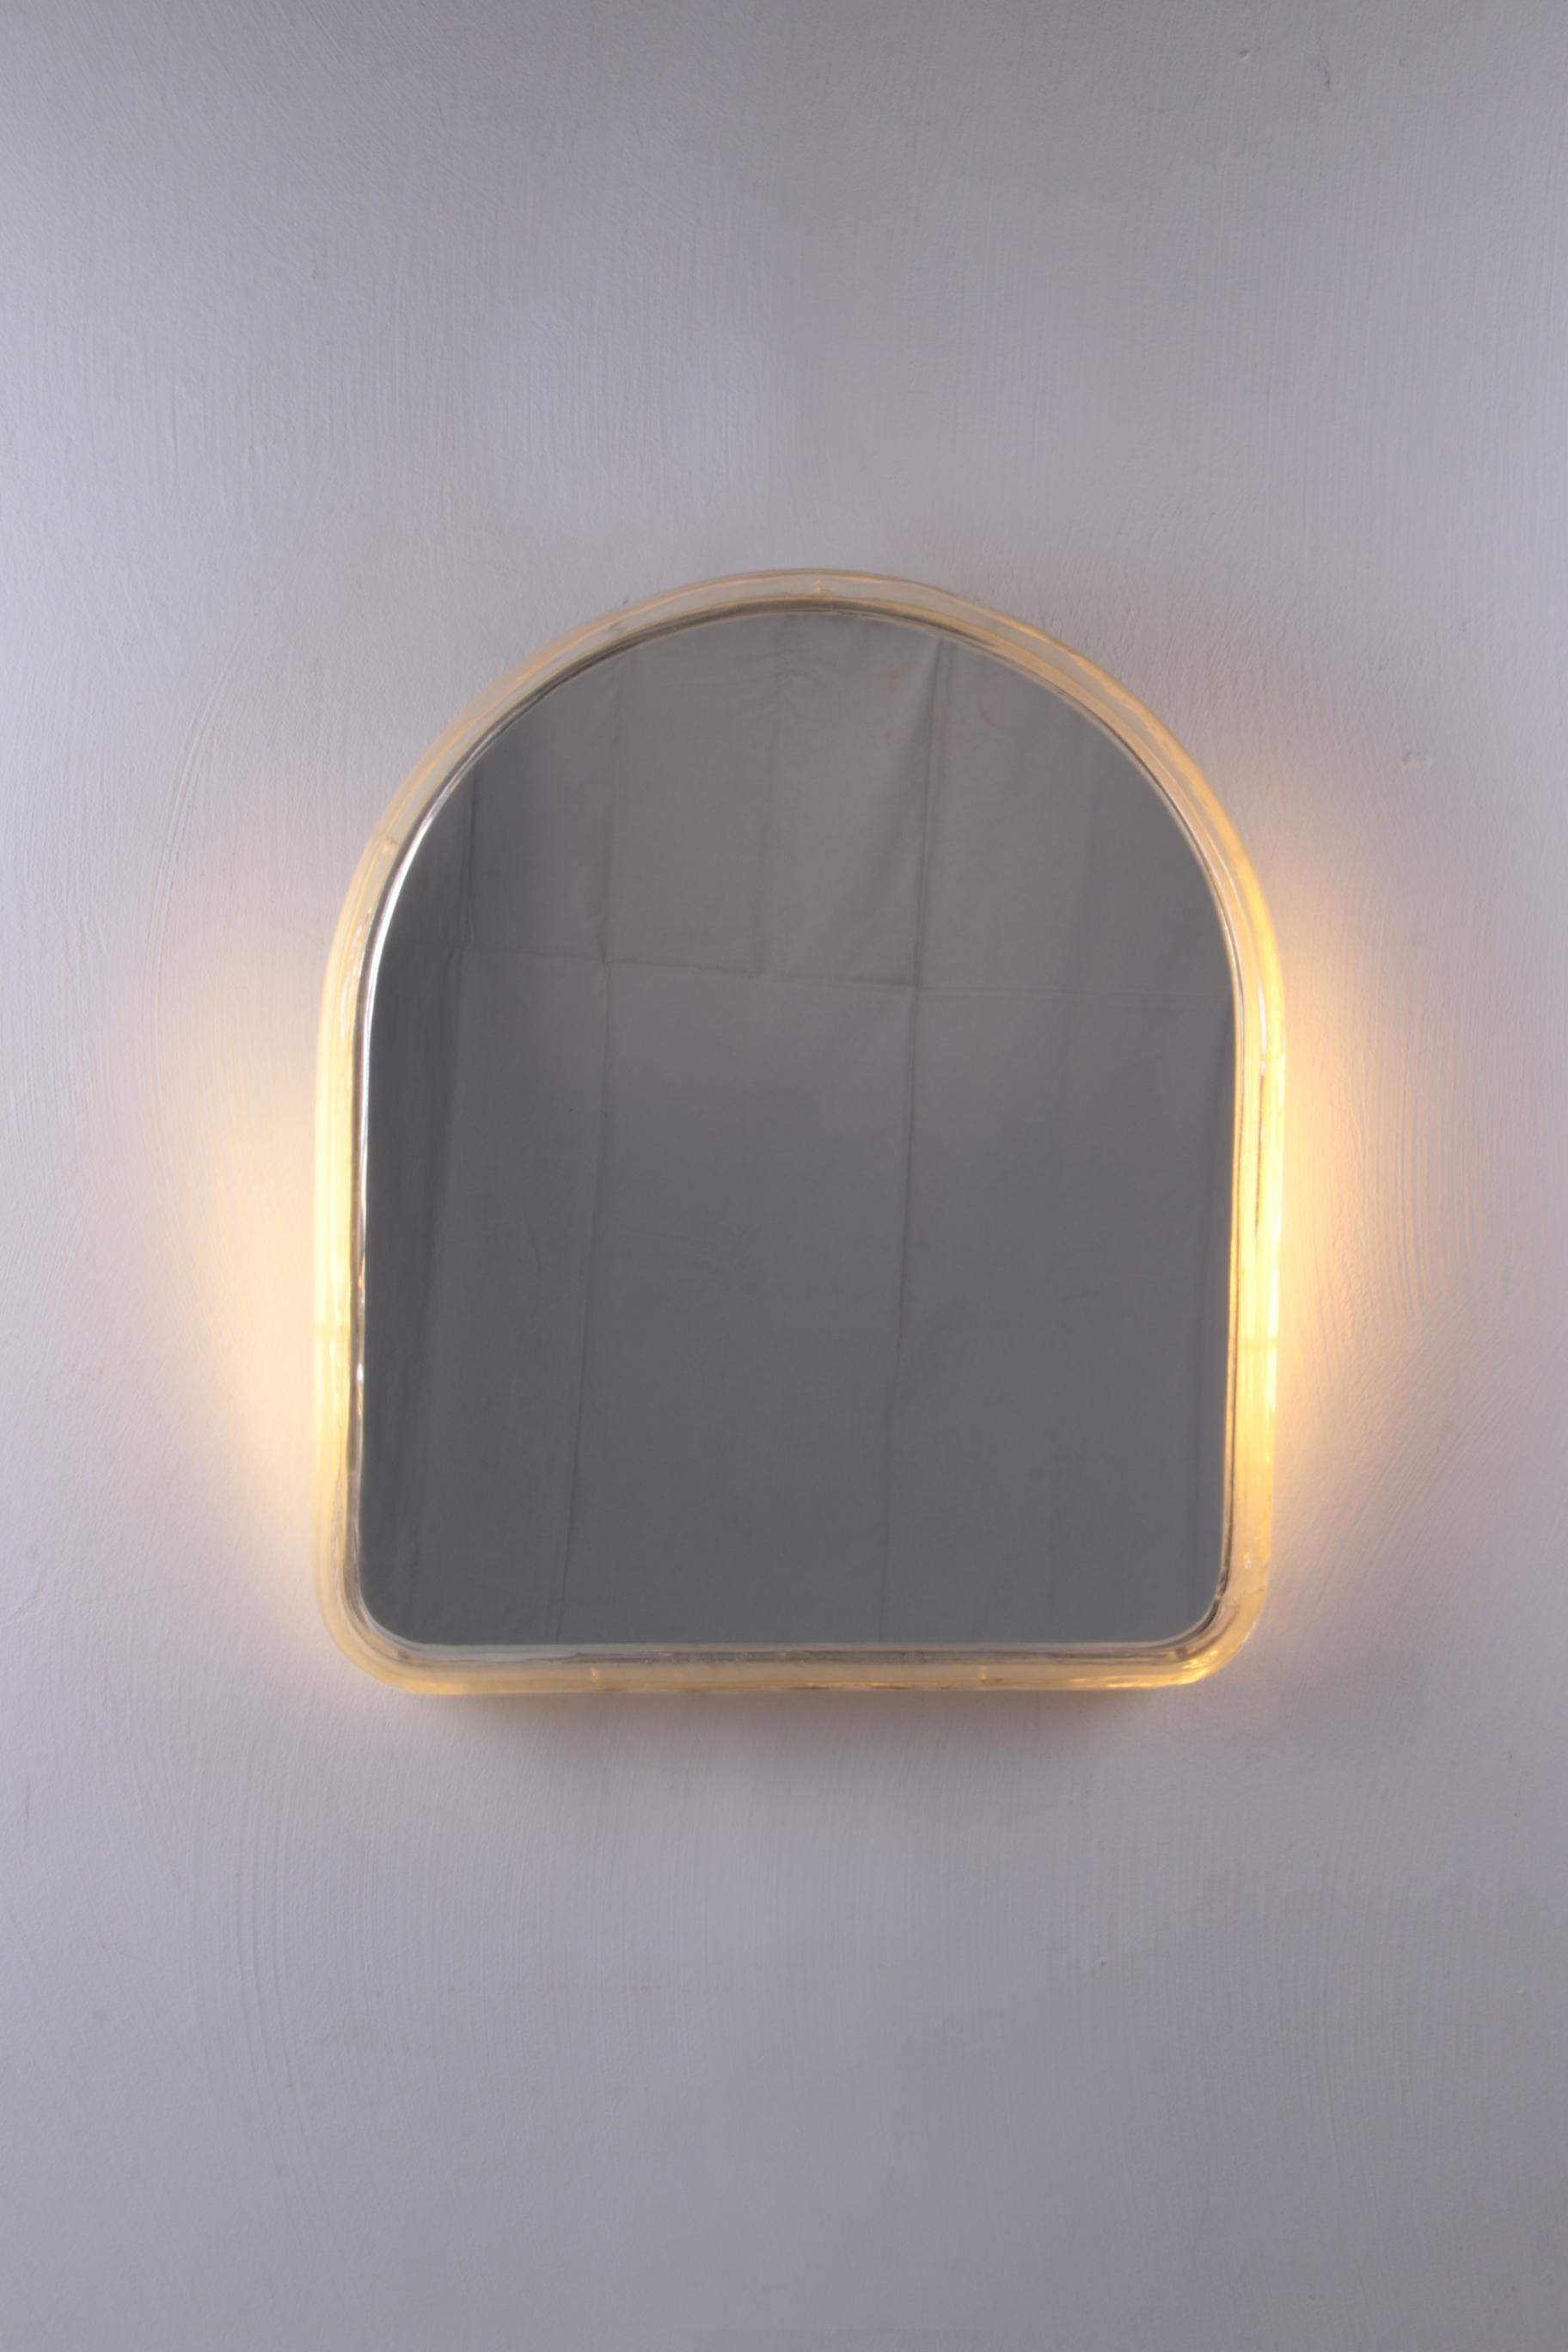 The beautiful mirror by Hillebrand is made of metal with plexiglass and was produced in the 1960s.

The shape used in this design indicates that this mirror is a rare model.

The mirror has interior lighting, which emits a warm soft light when